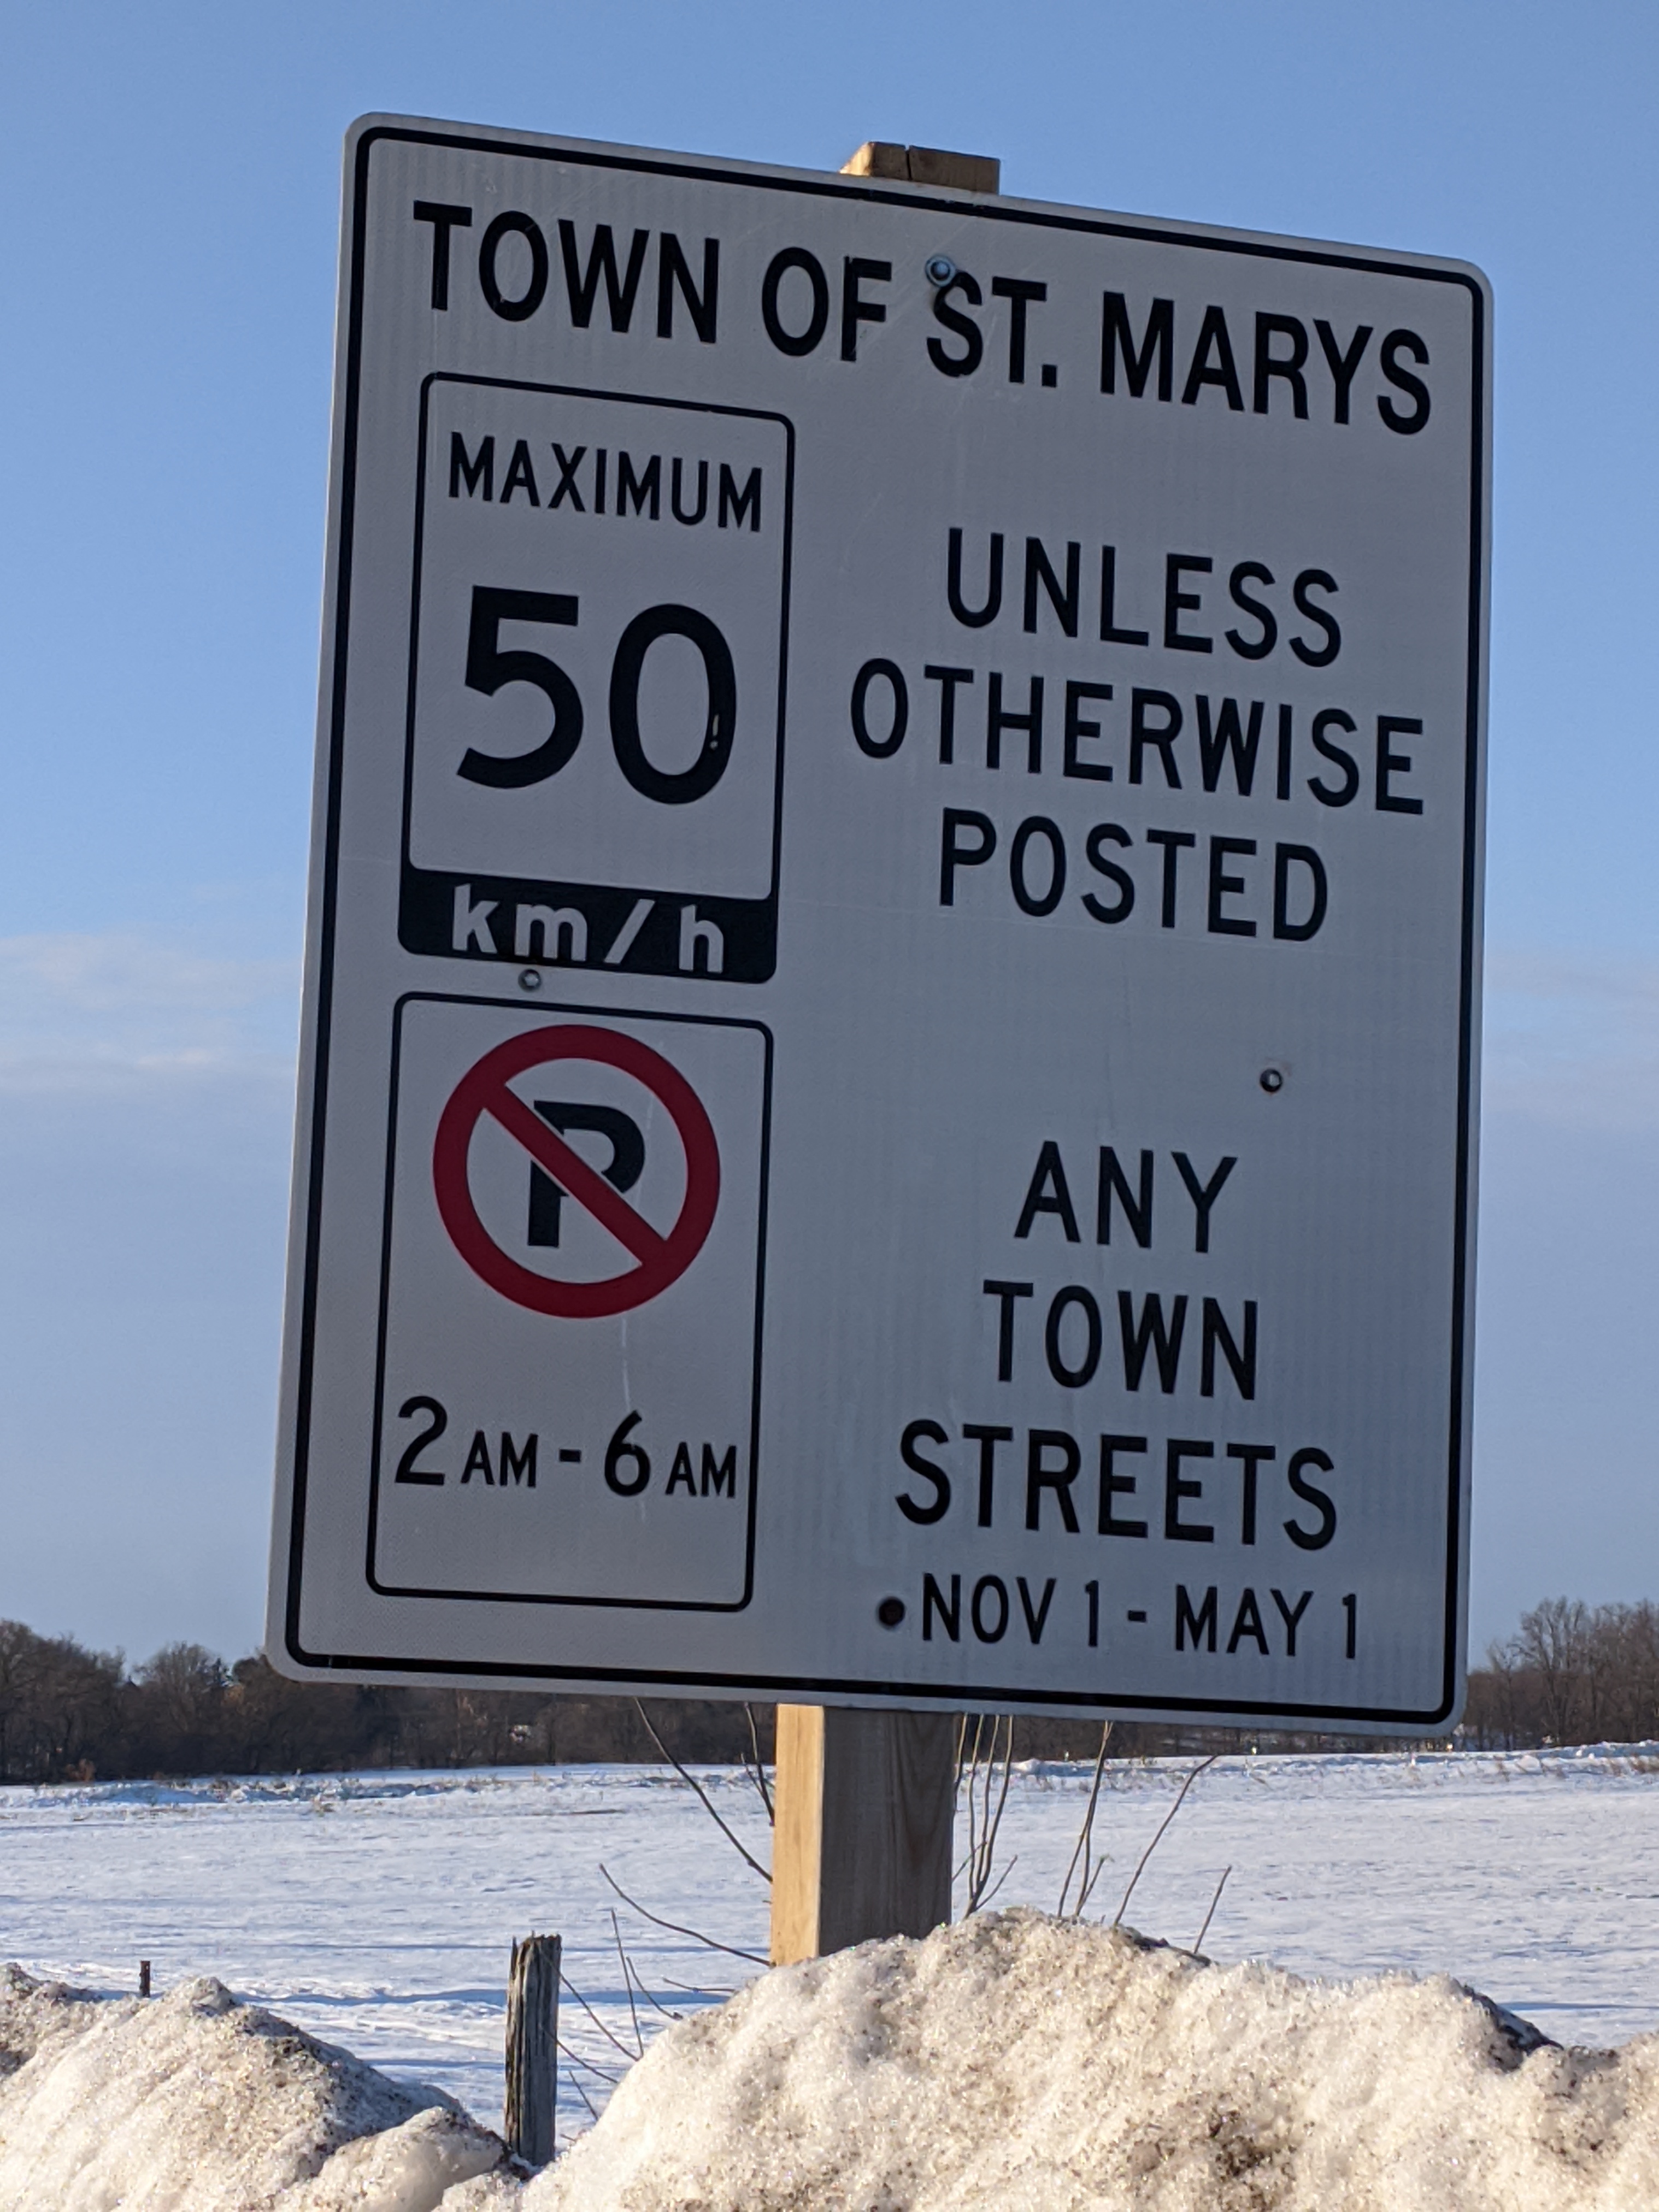 Image of street sign listing parking restrictions